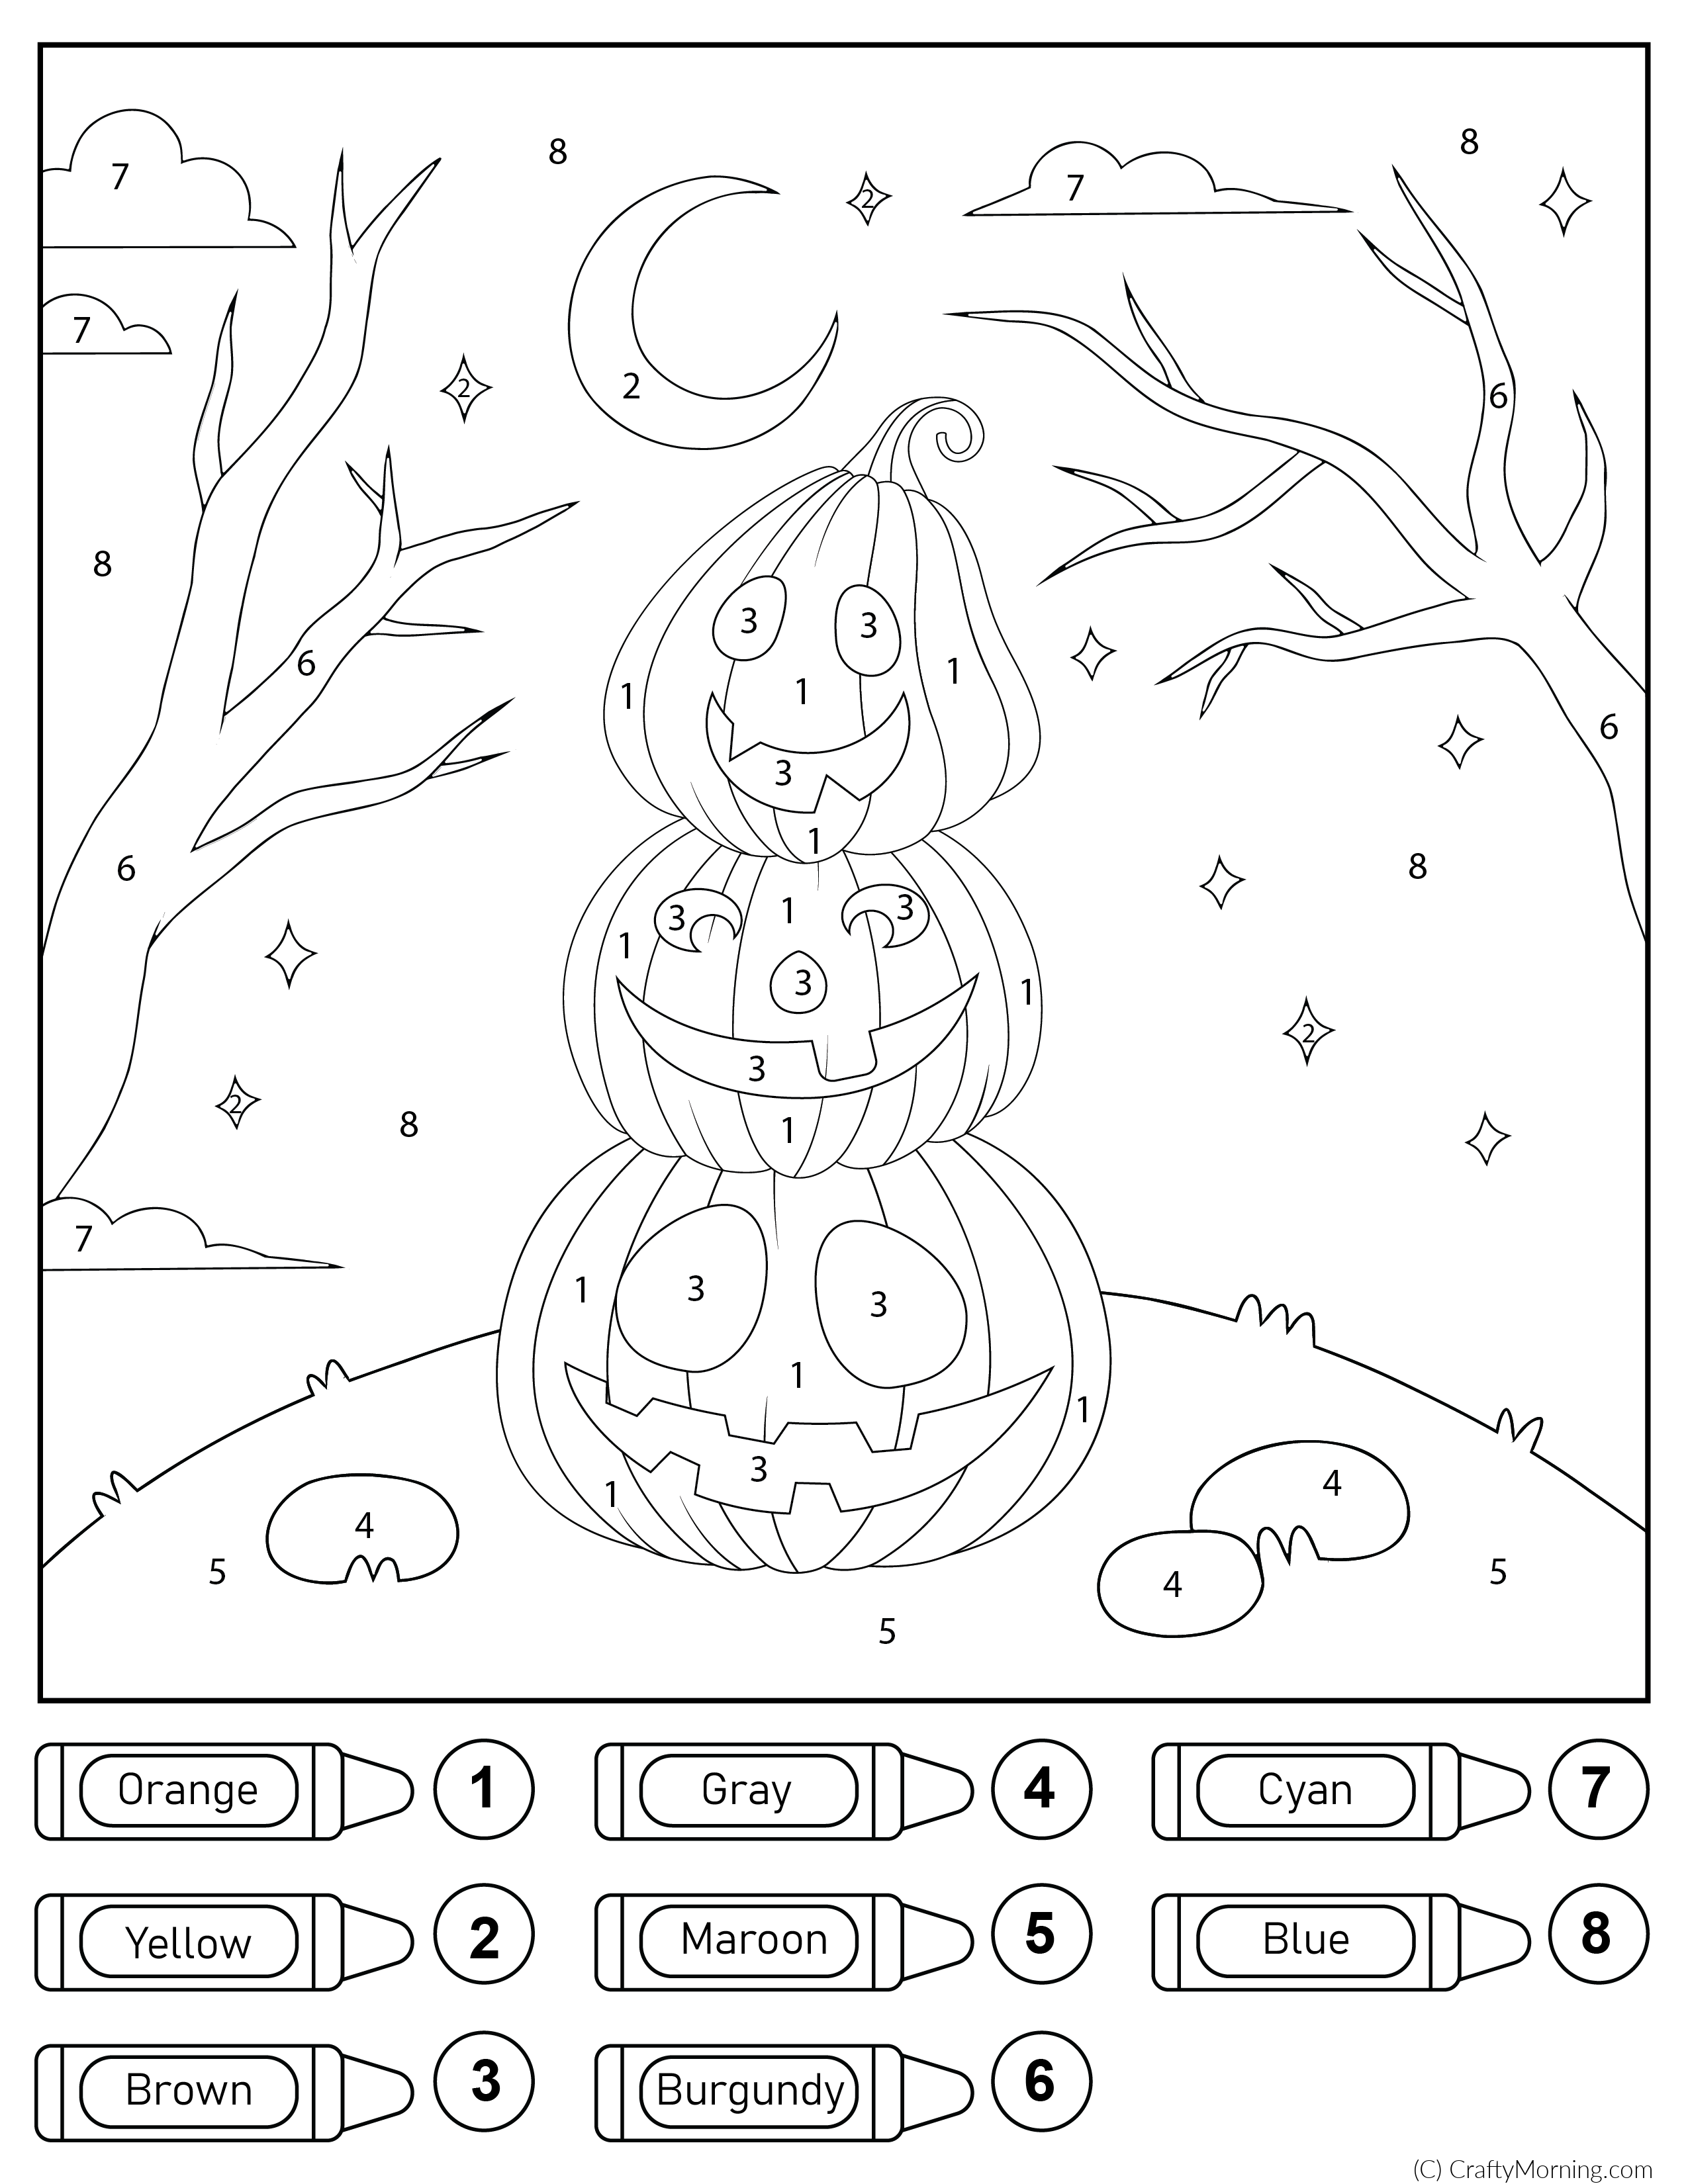 halloween-color-by-number-printable-crafty-morning